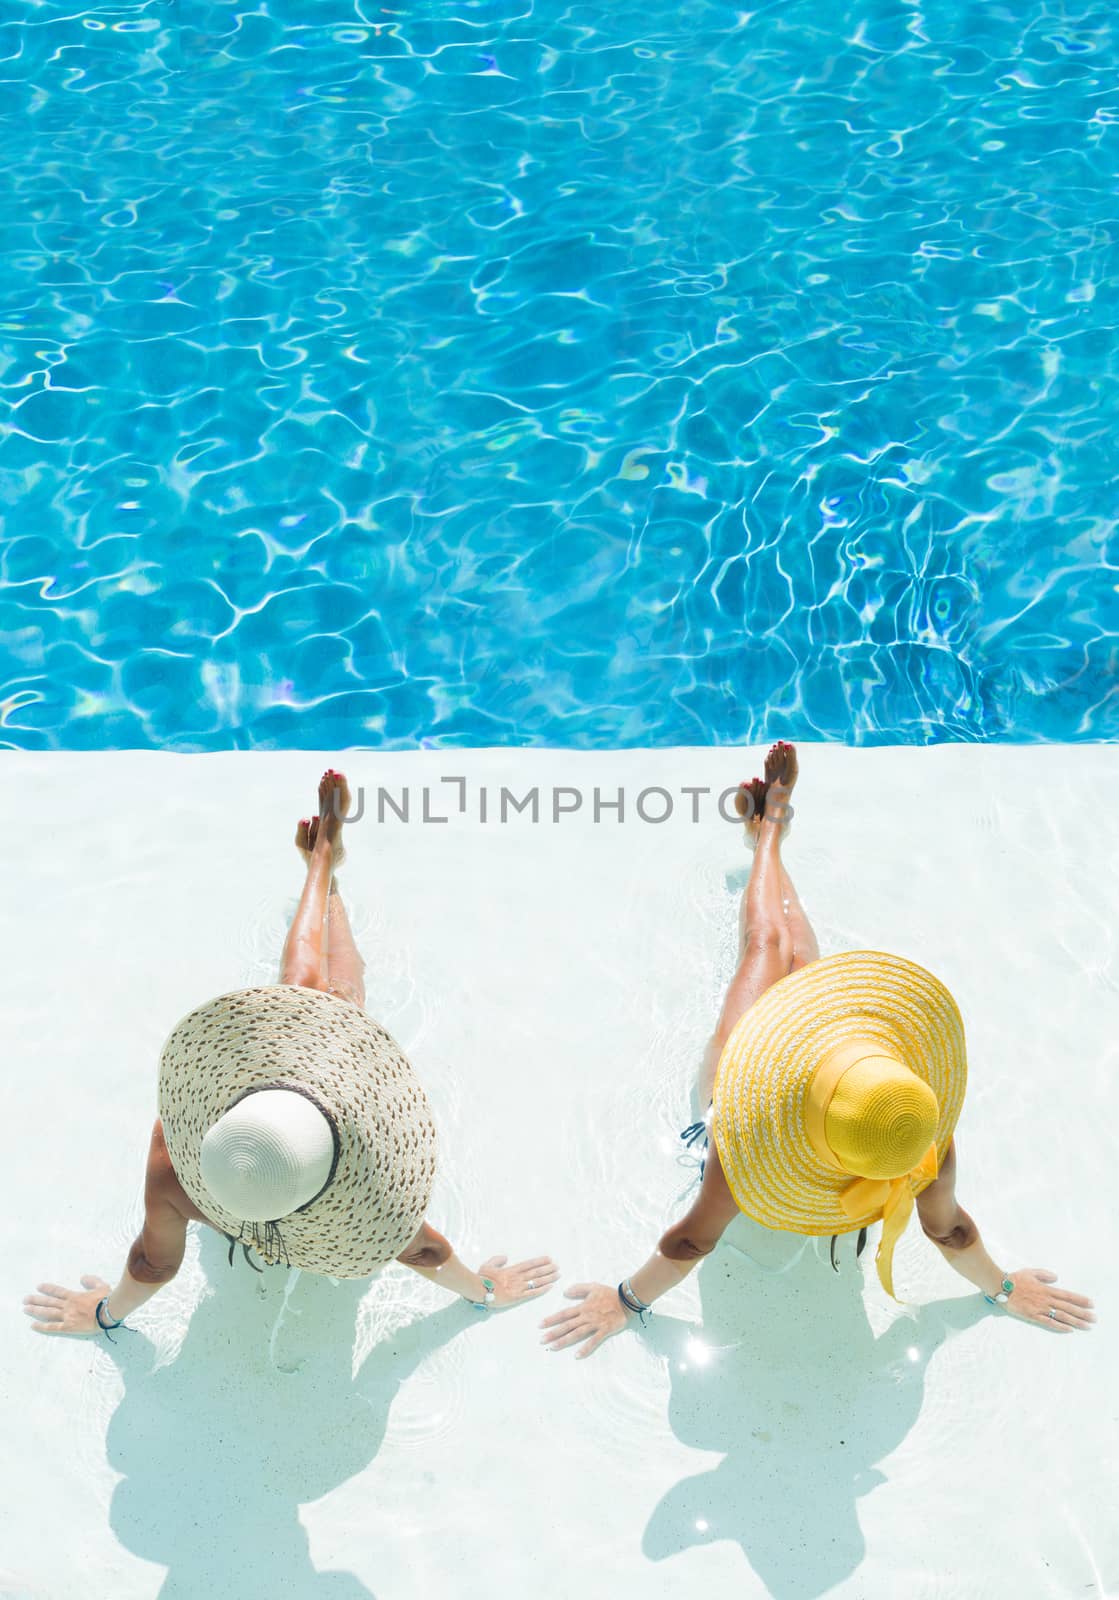 Two women in a hat sitting on the edge of the swimming pool